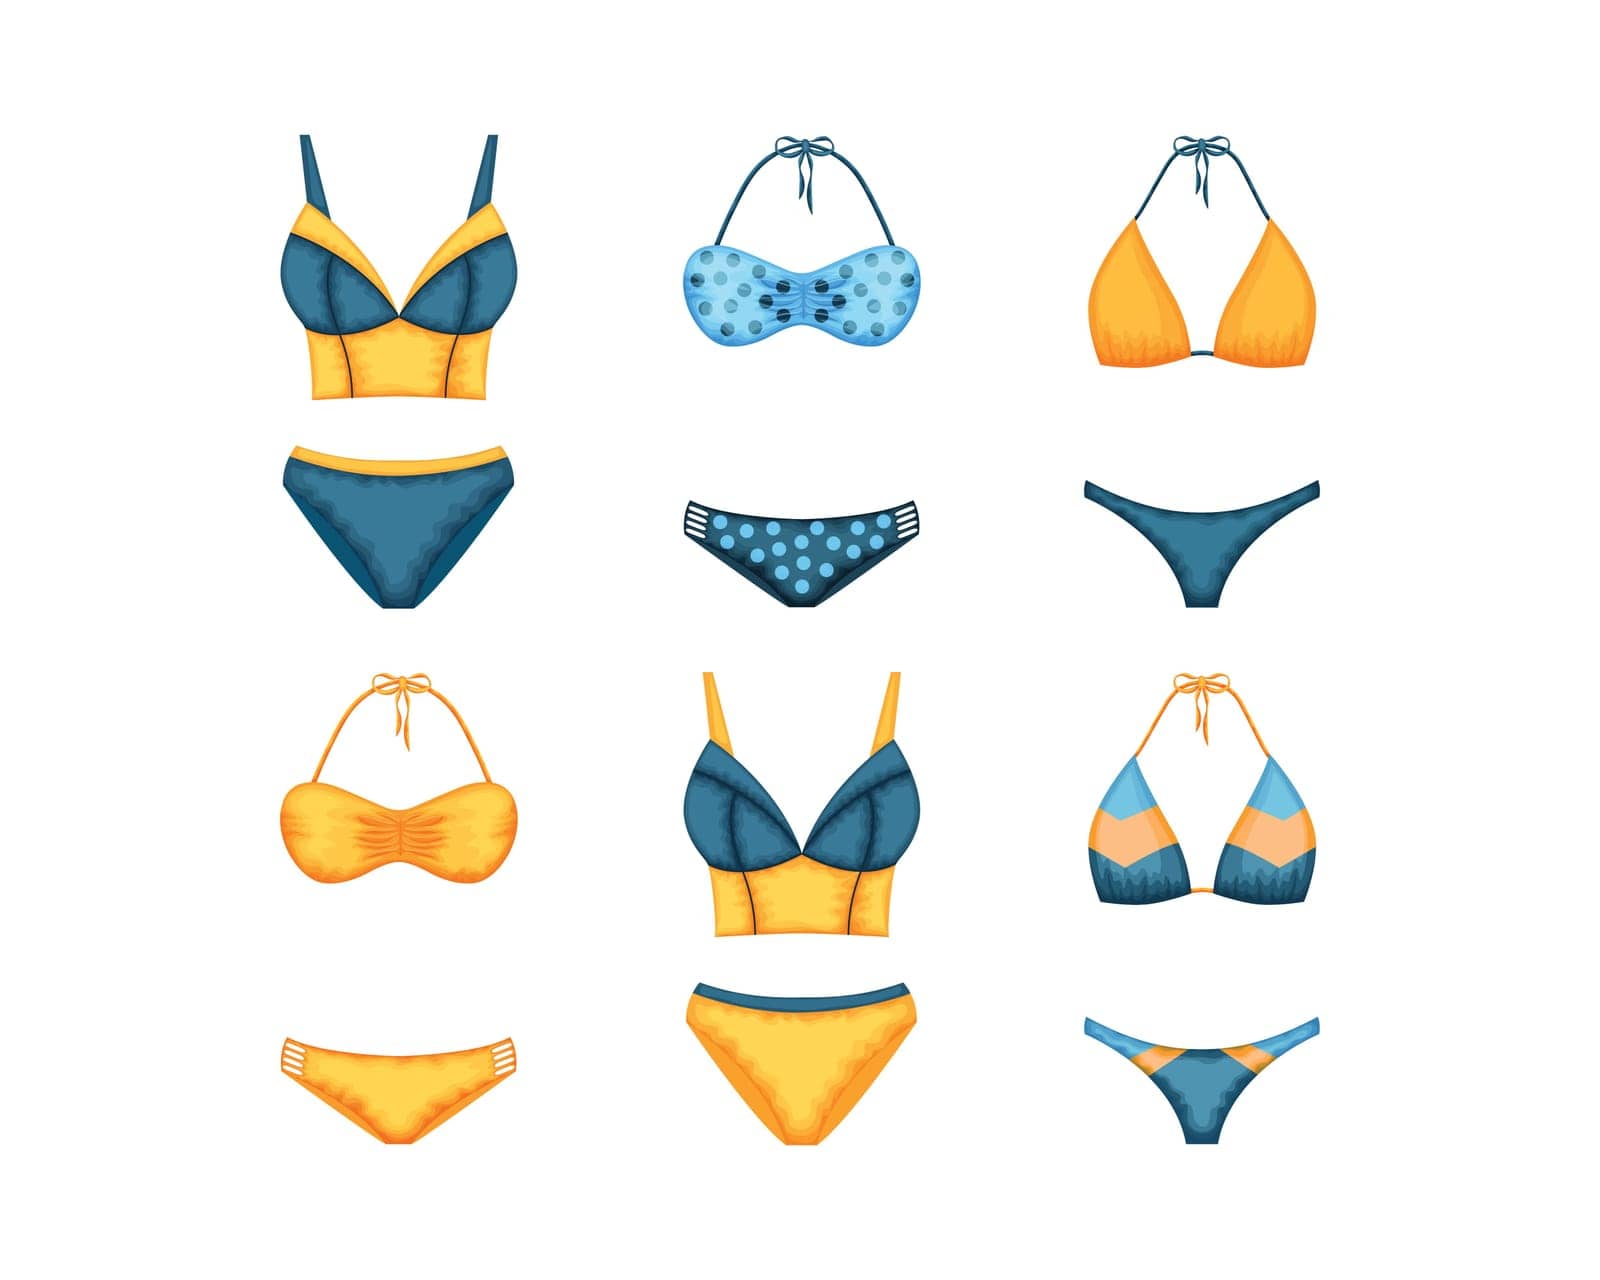 Swimwear set. A separate swimsuit in blue and yellow. Collection of colored swimsuits. Clothes for a beach holiday. Women s clothing. Vector illustration.